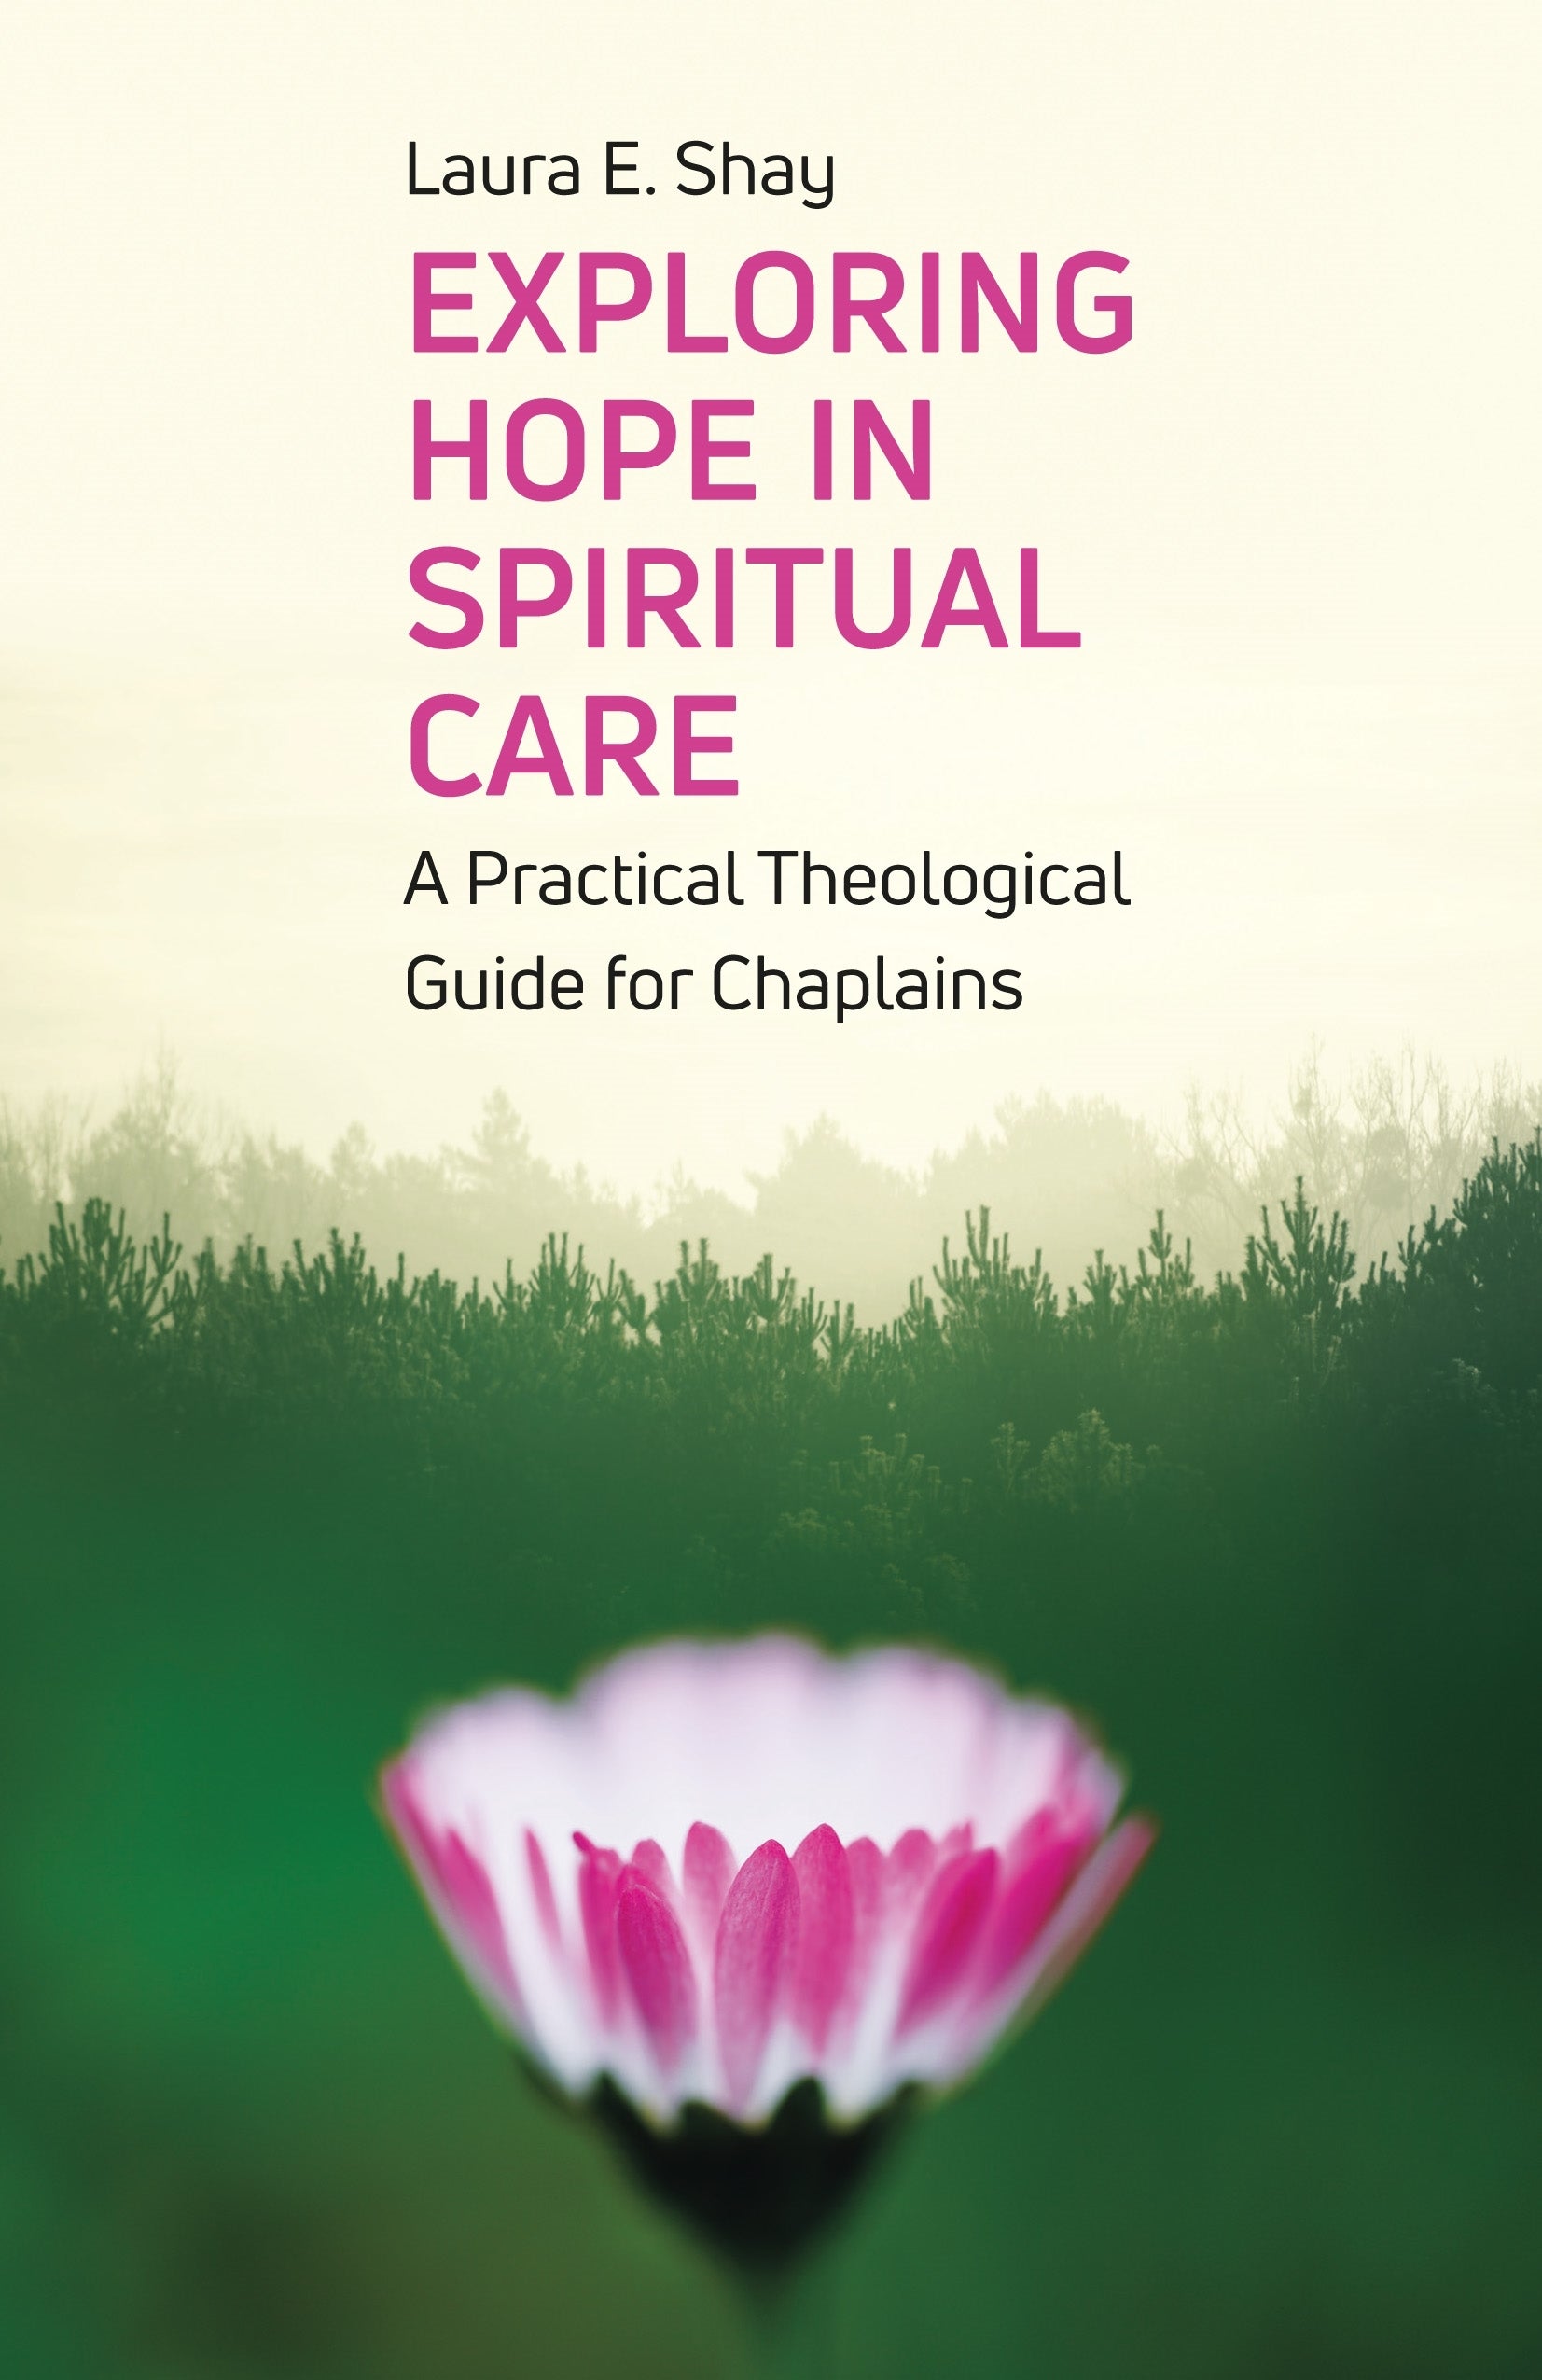 Exploring Hope in Spiritual Care by Laura Shay